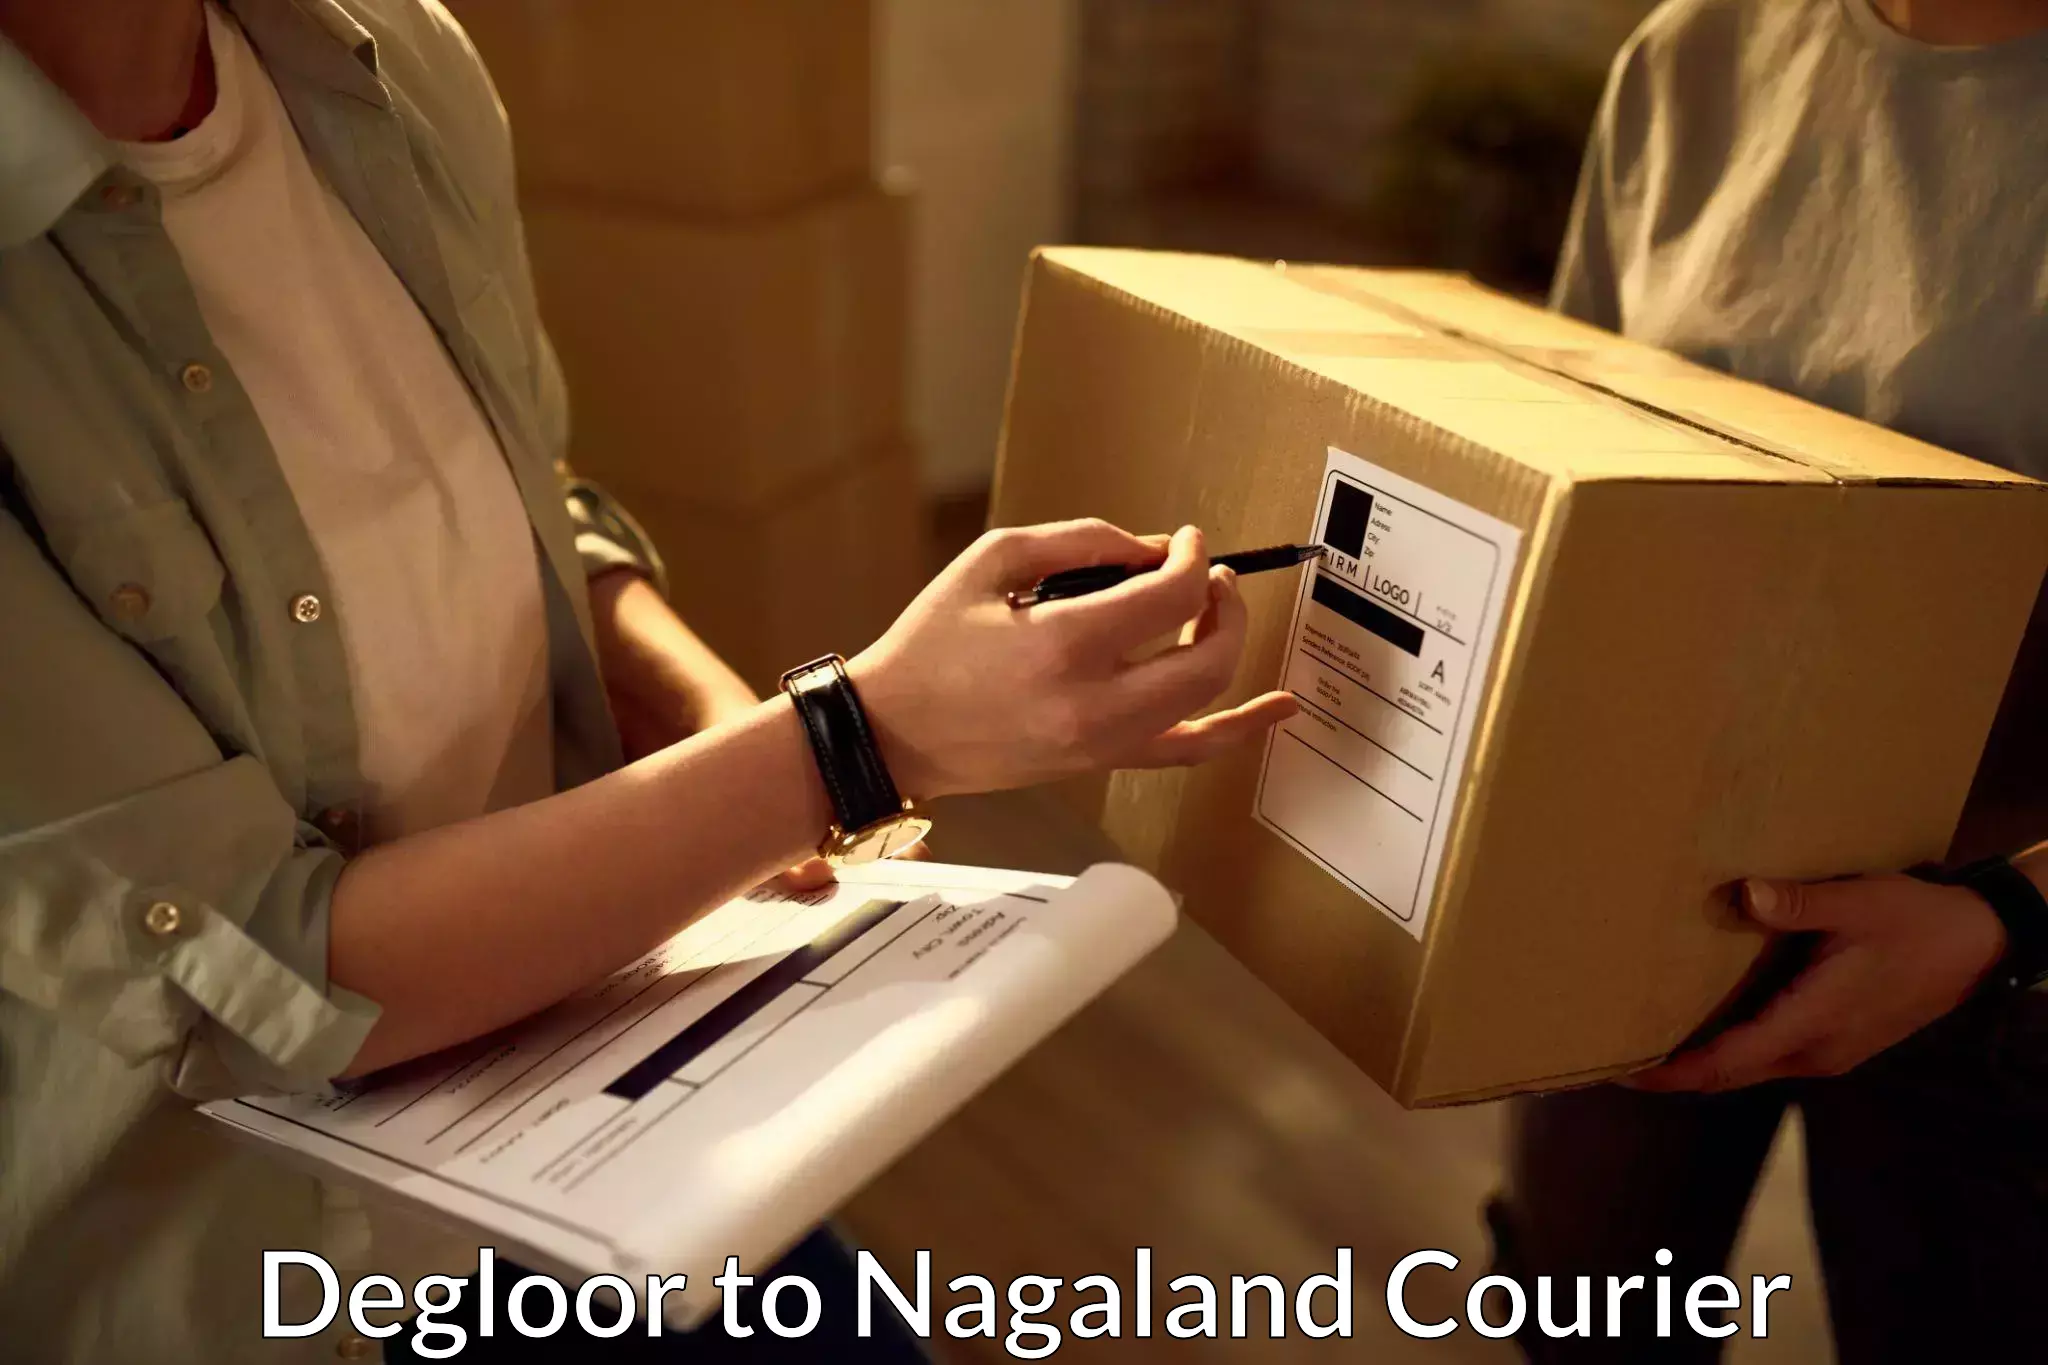 Local delivery service Degloor to Nagaland